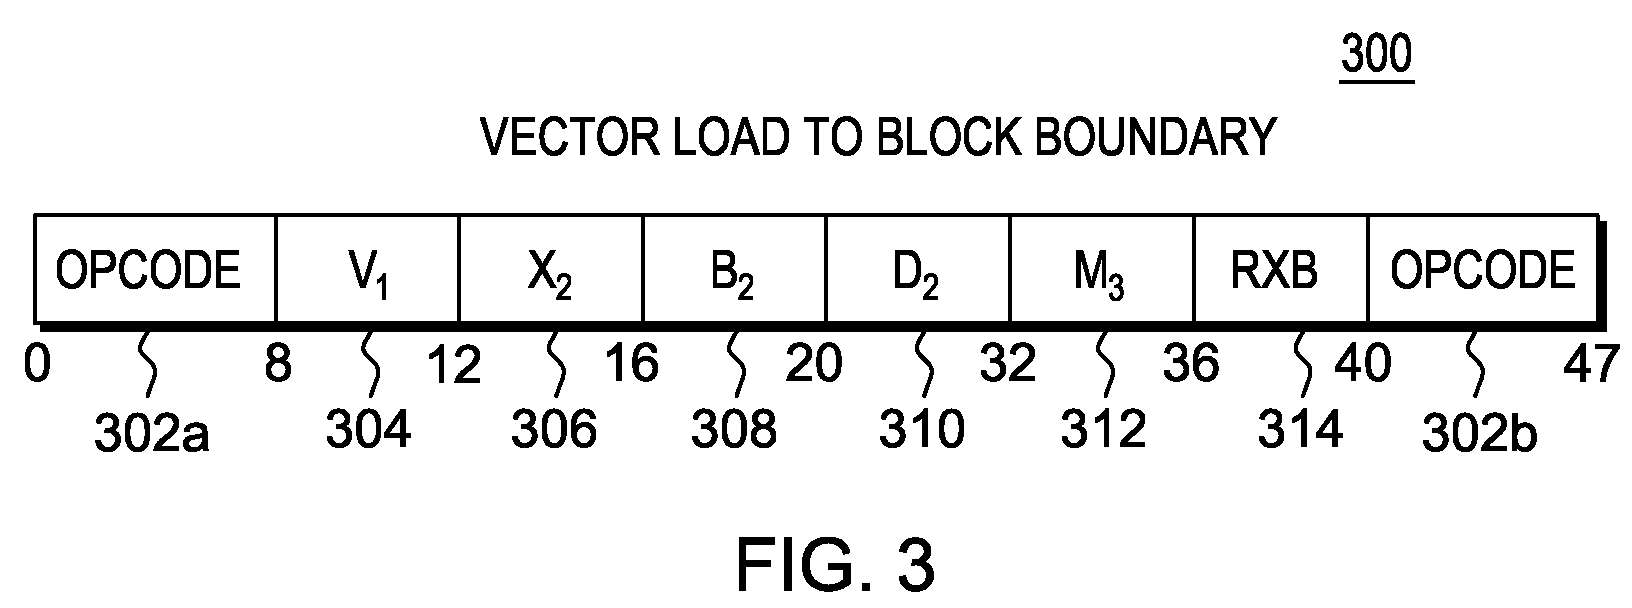 Instruction to load data up to a specified memory boundary indicated by the instruction